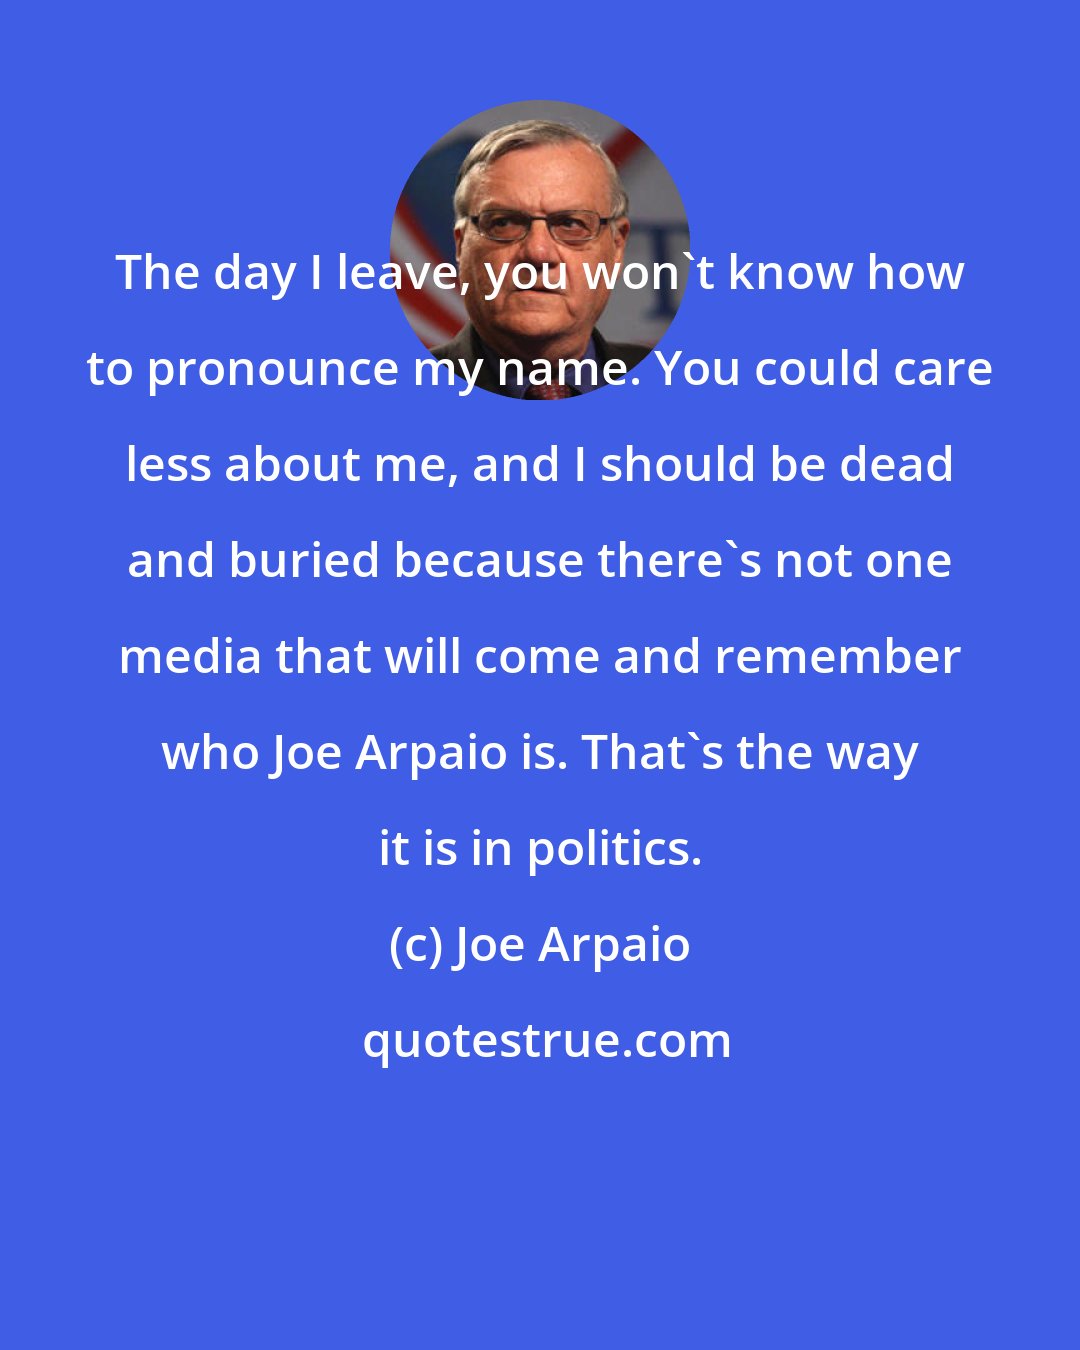 Joe Arpaio: The day I leave, you won't know how to pronounce my name. You could care less about me, and I should be dead and buried because there's not one media that will come and remember who Joe Arpaio is. That's the way it is in politics.